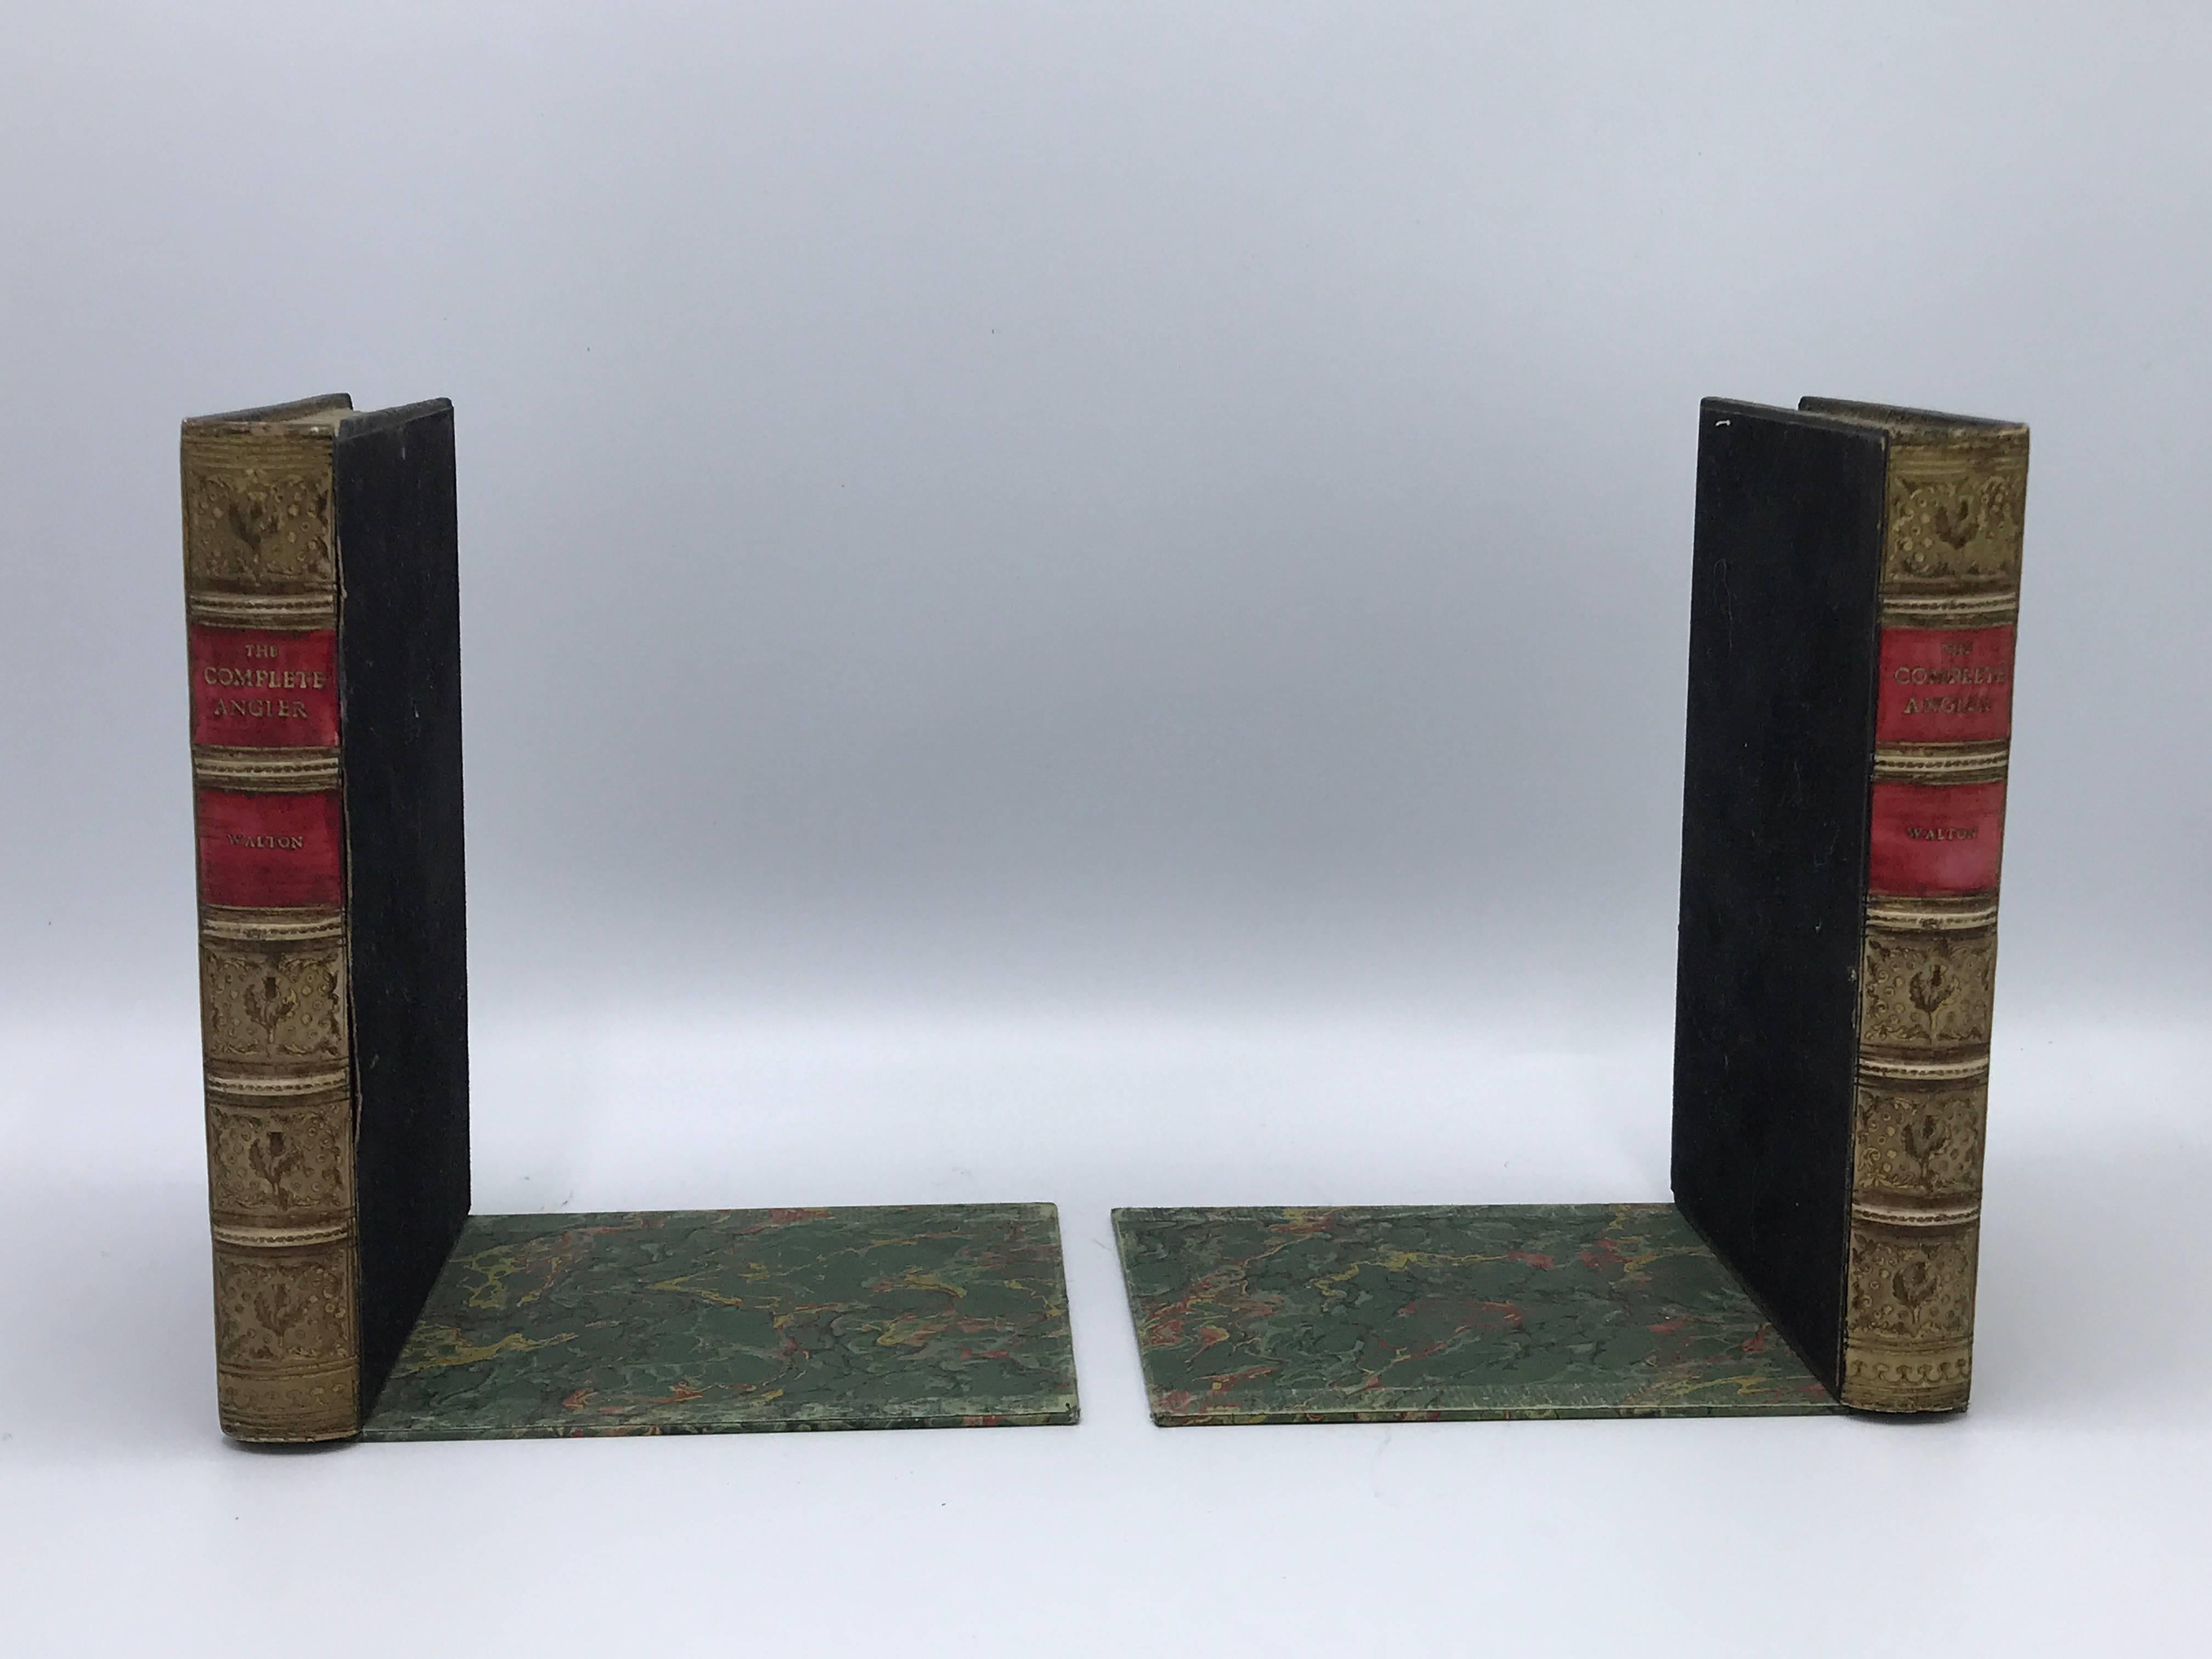 Offered is a stunning pair of 1940s faux leather-resin book sculptural bookends. Metal framing on base and inner book, great for books of all sizes.